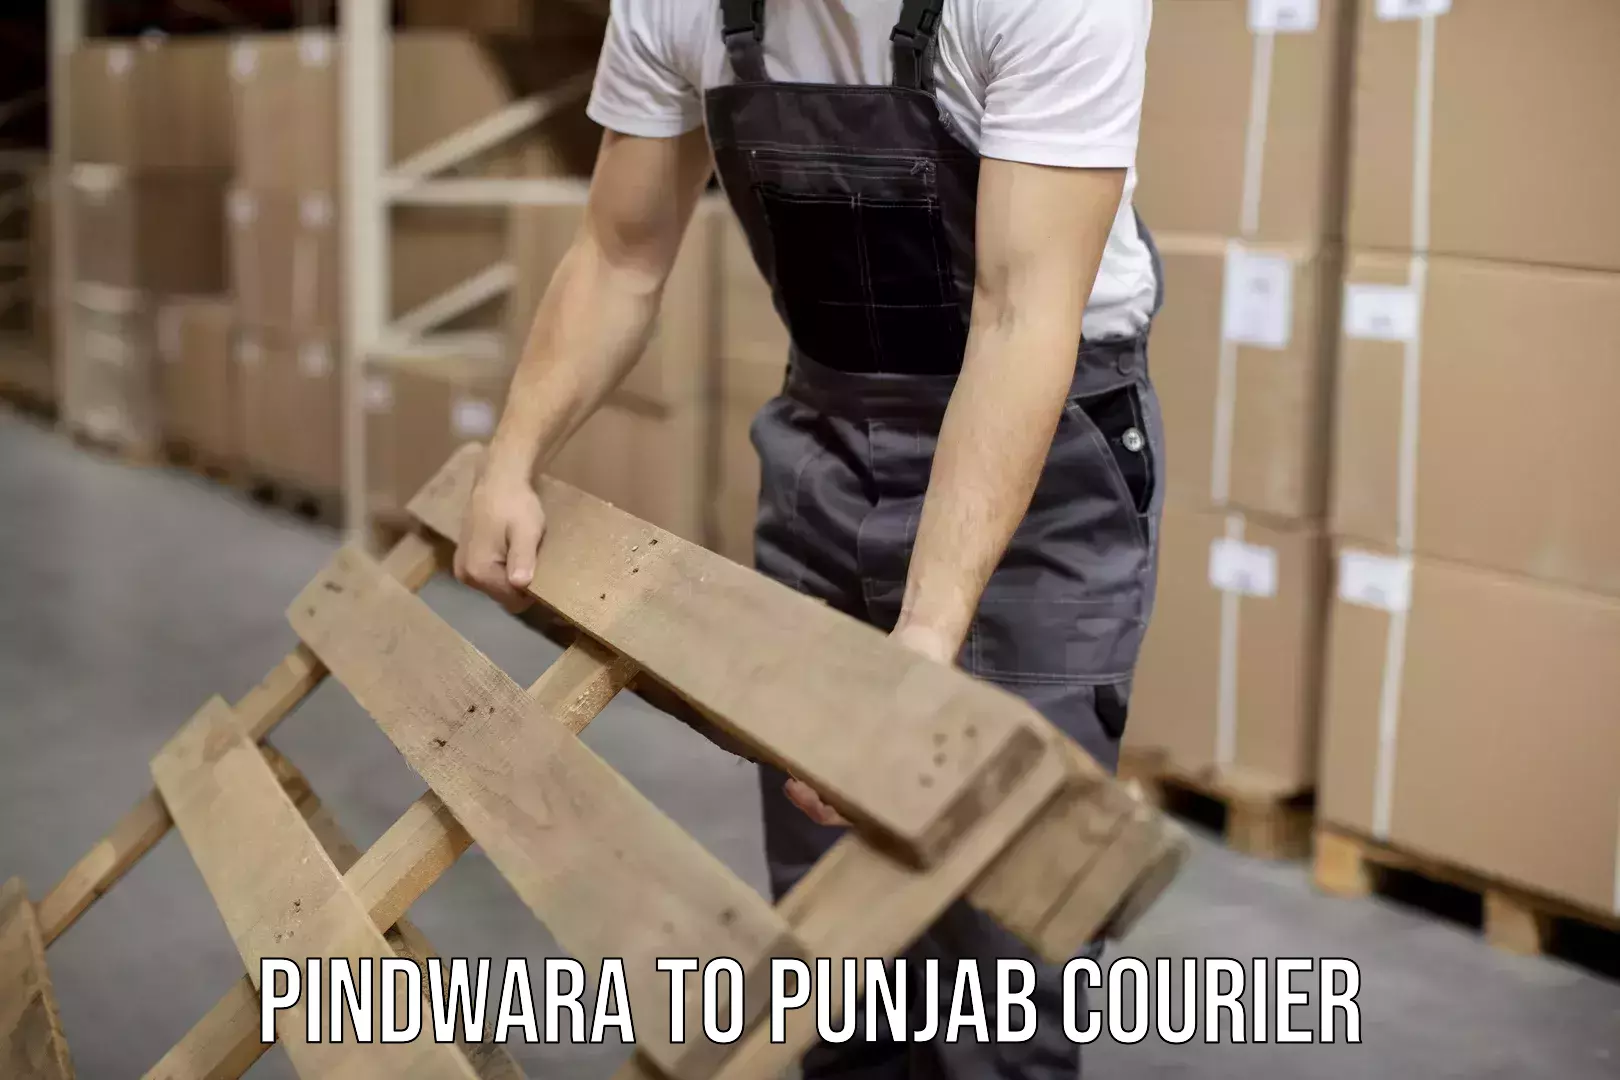 Courier service comparison Pindwara to Begowal